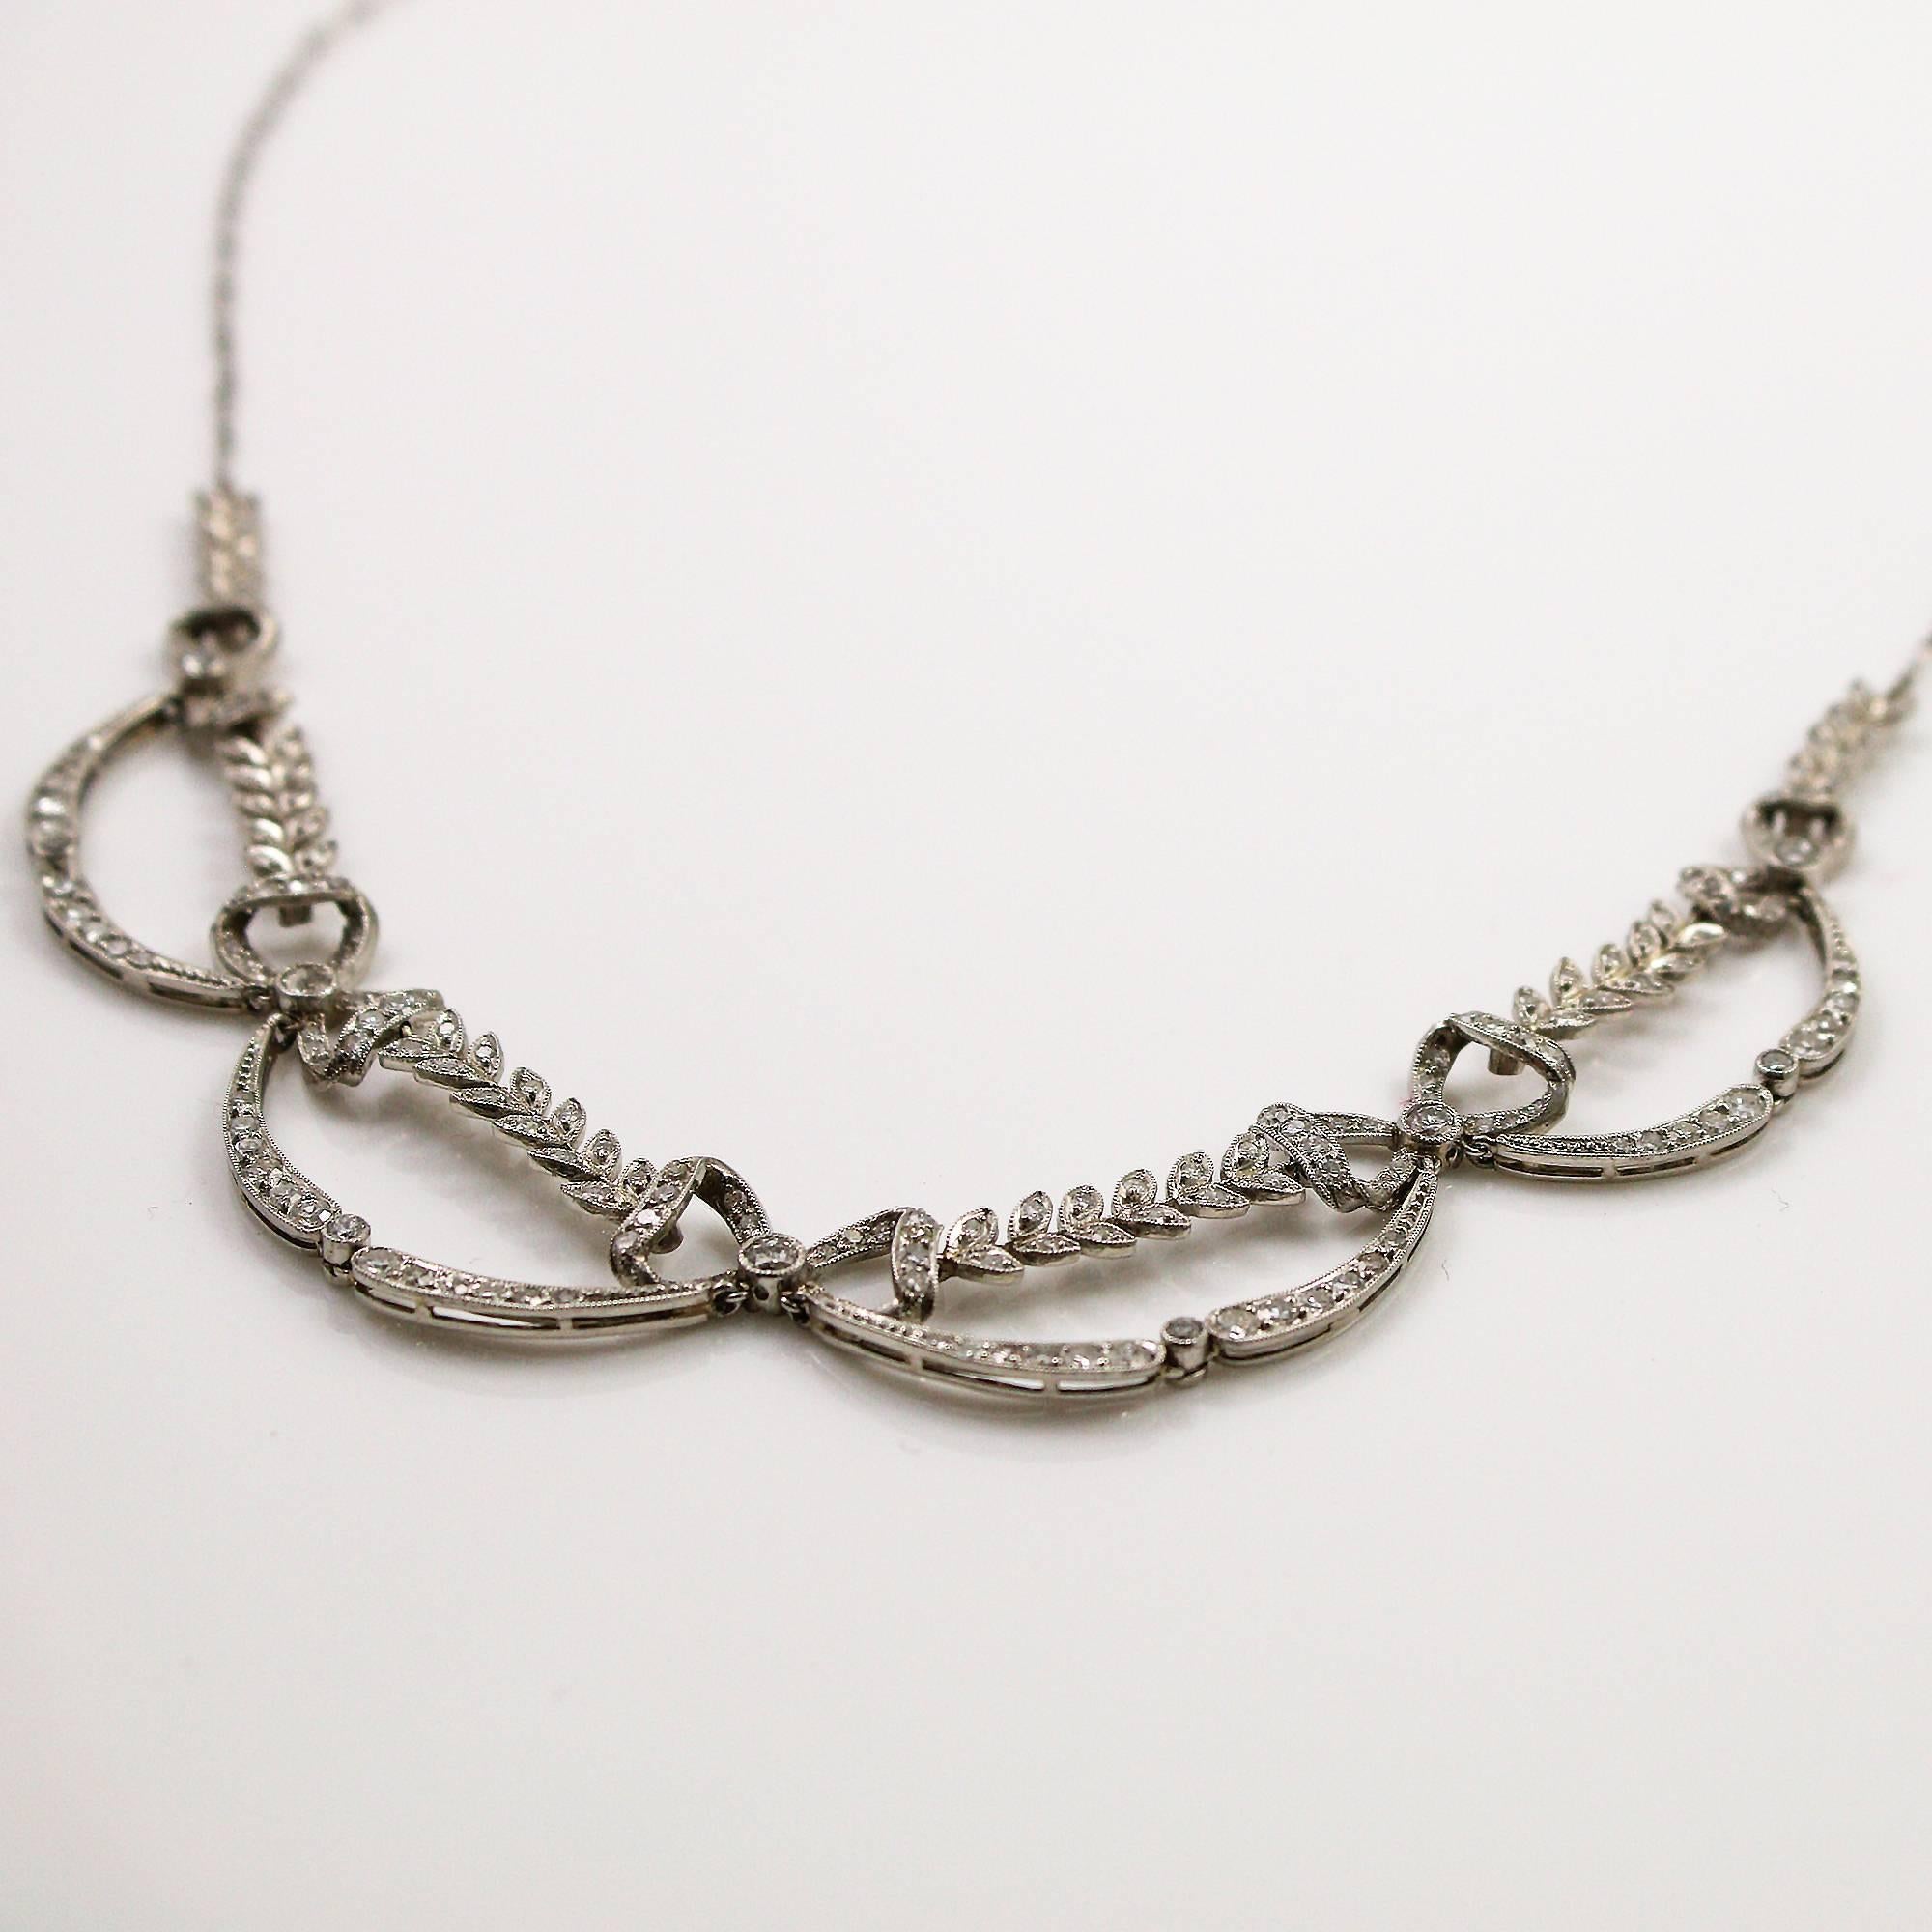 Women's or Men's Edwardian Platinum And Diamond Bow and Leaf Motif Necklace